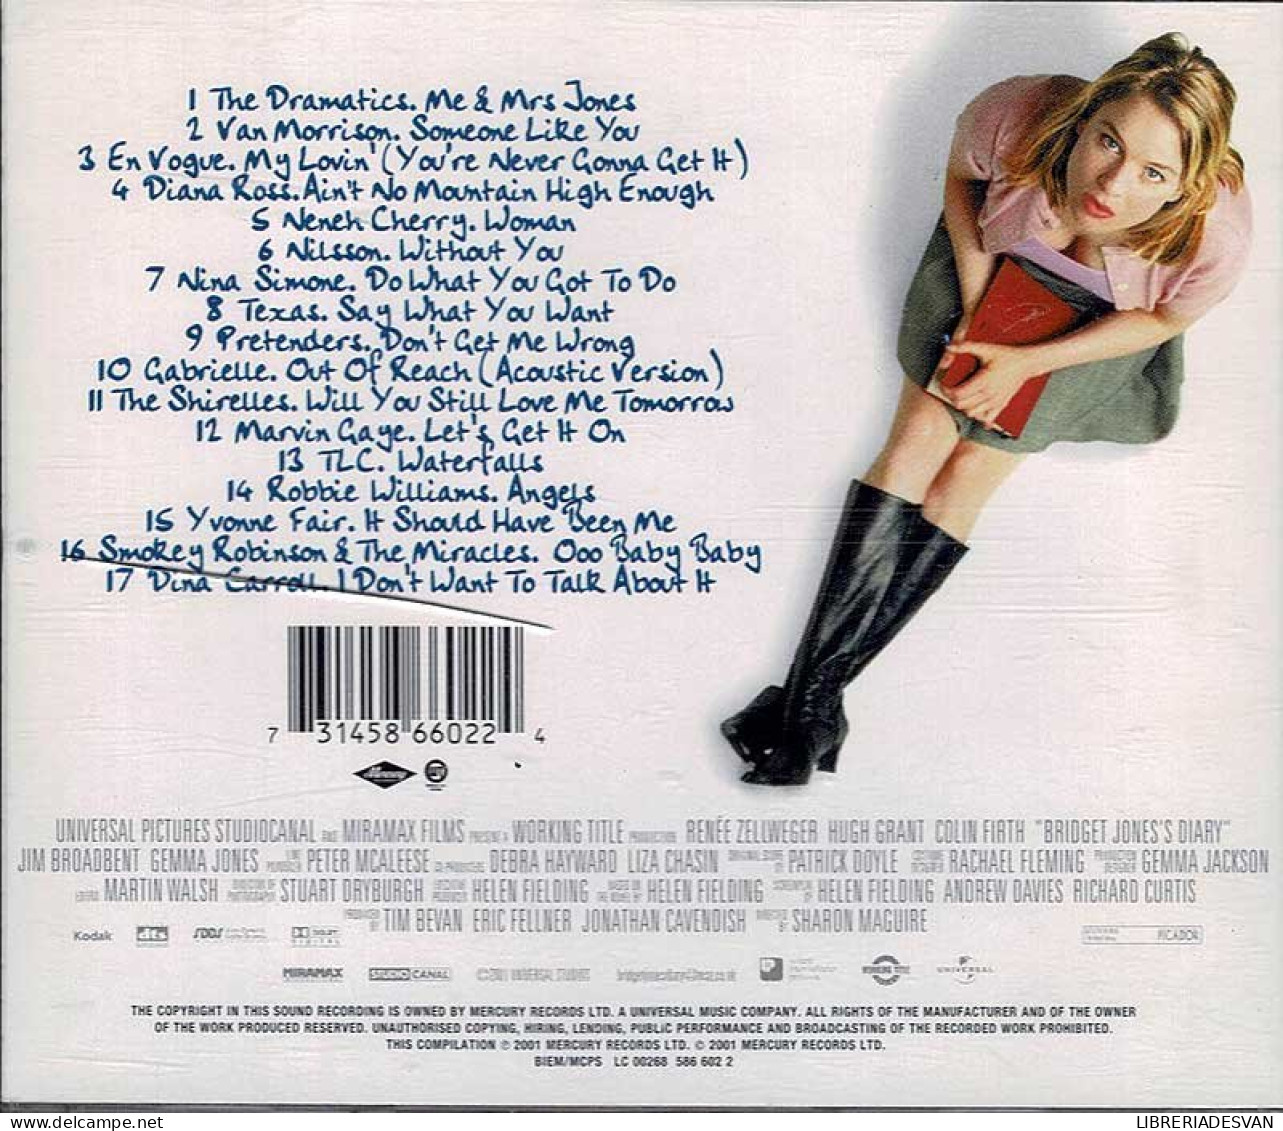 Bridget Jones's Diary 2 (More Music From The Motion Picture & Other V. G. Songs). CD - Musica Di Film